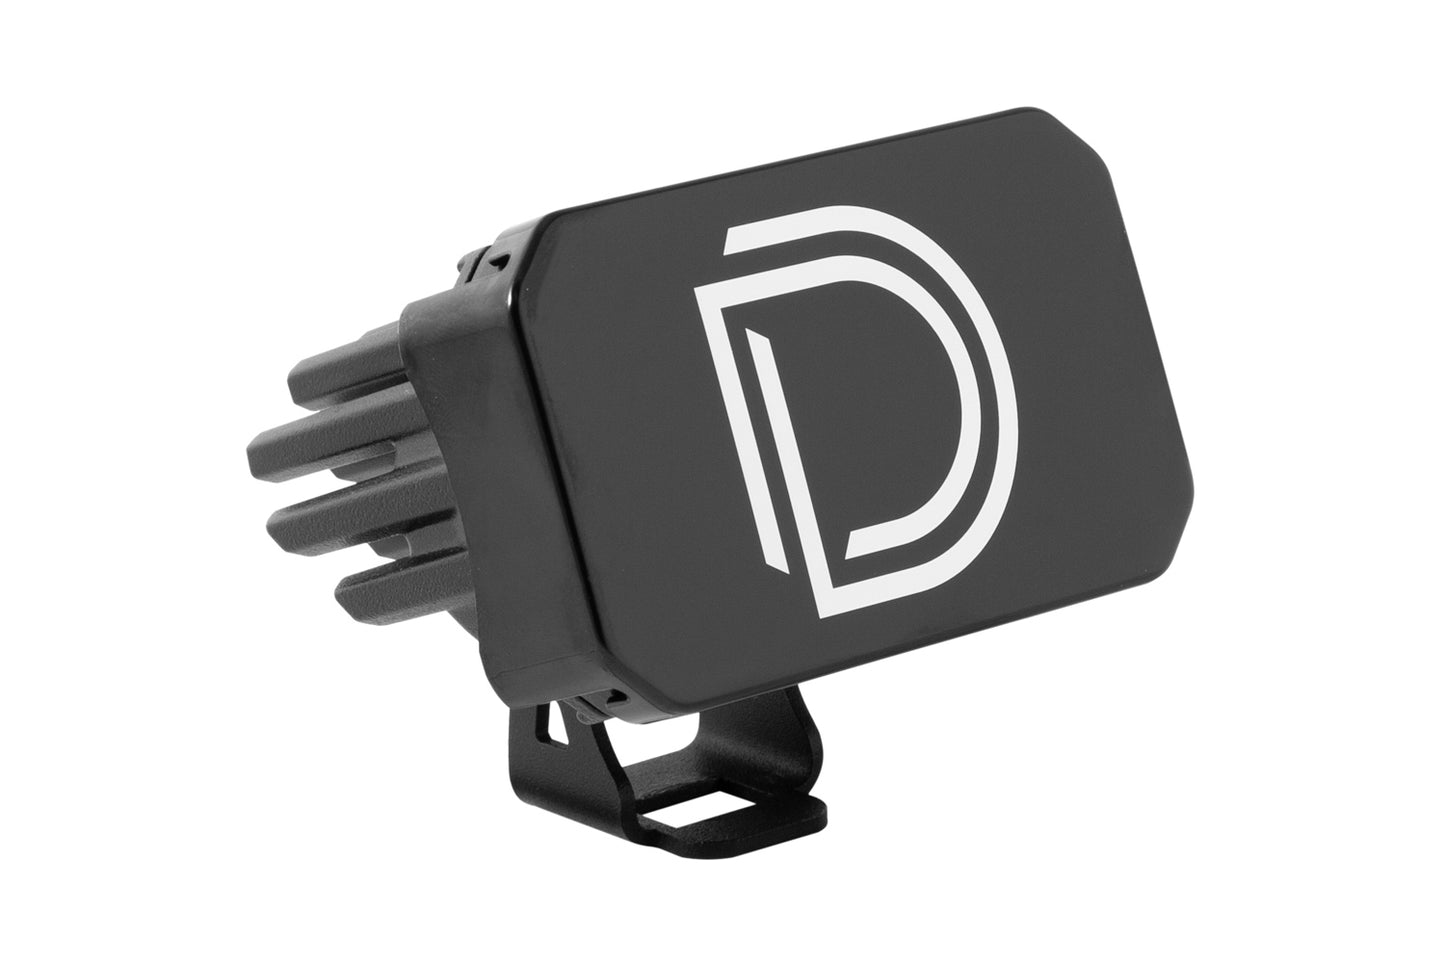 Diode Dynamics - Stage Series C2 LED Pod Cover